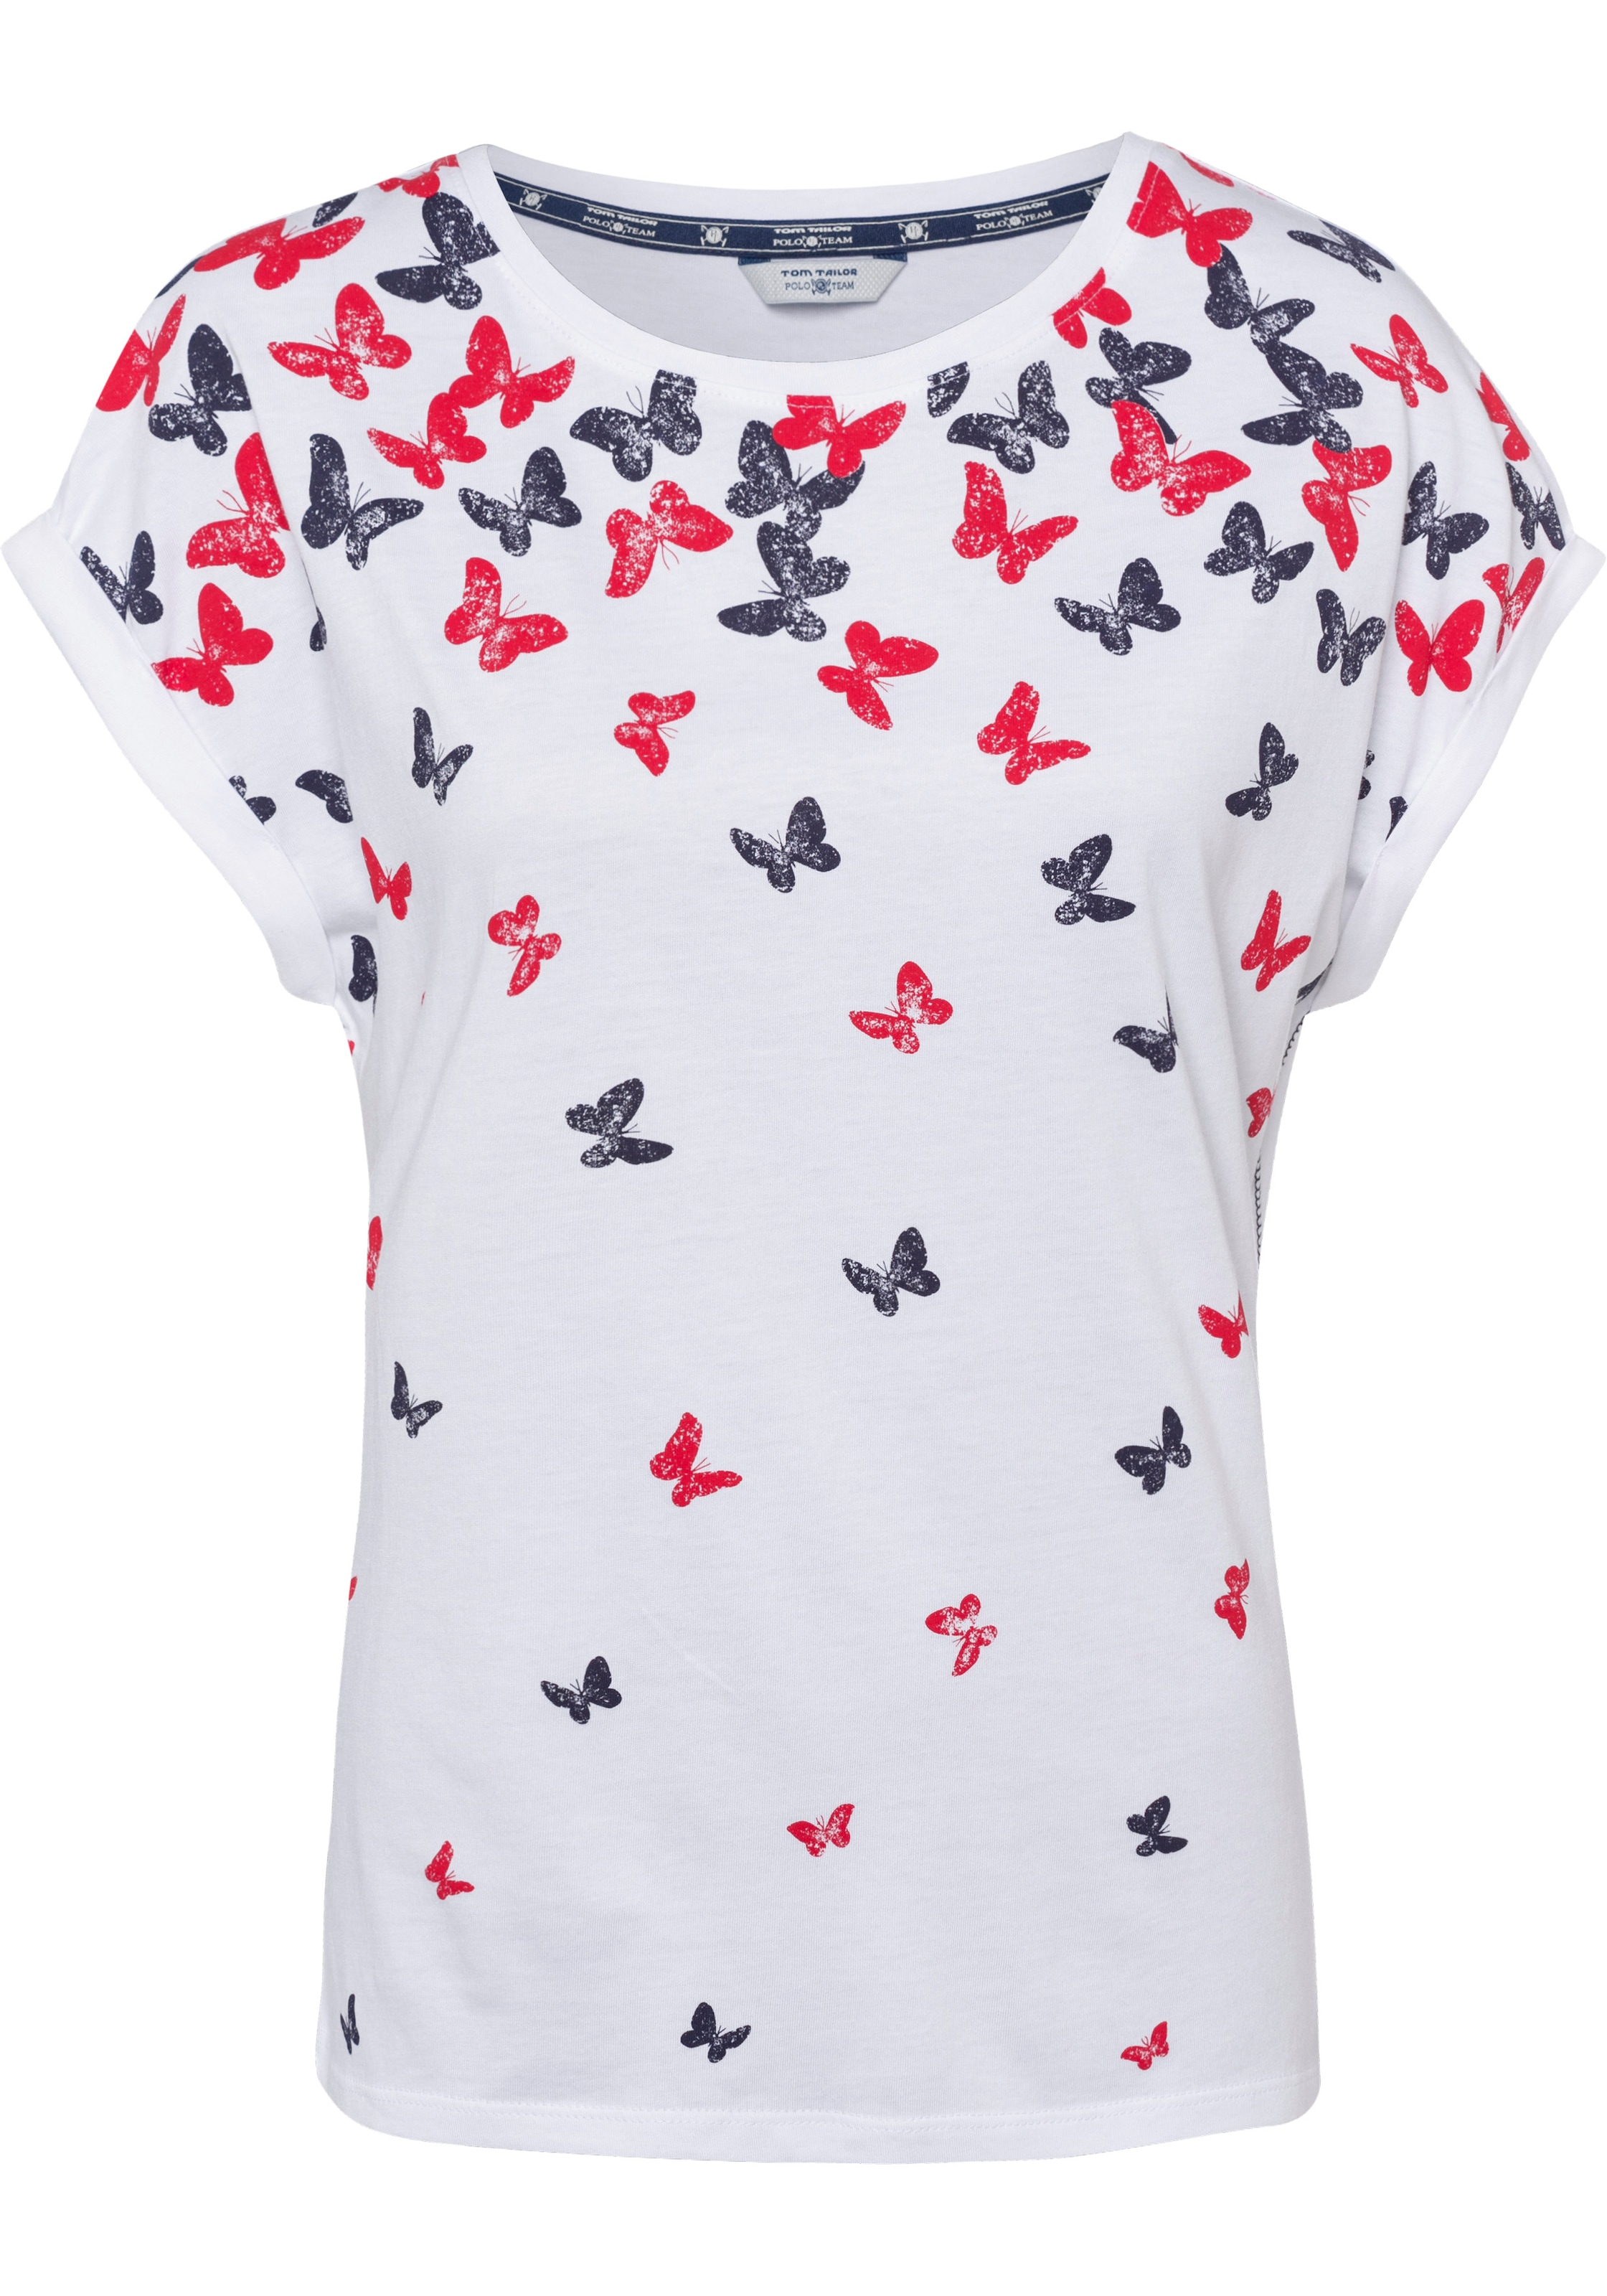 TOM TAILOR Polo Team T-Shirt, mit Print niedlichem All-Over ♕ bei